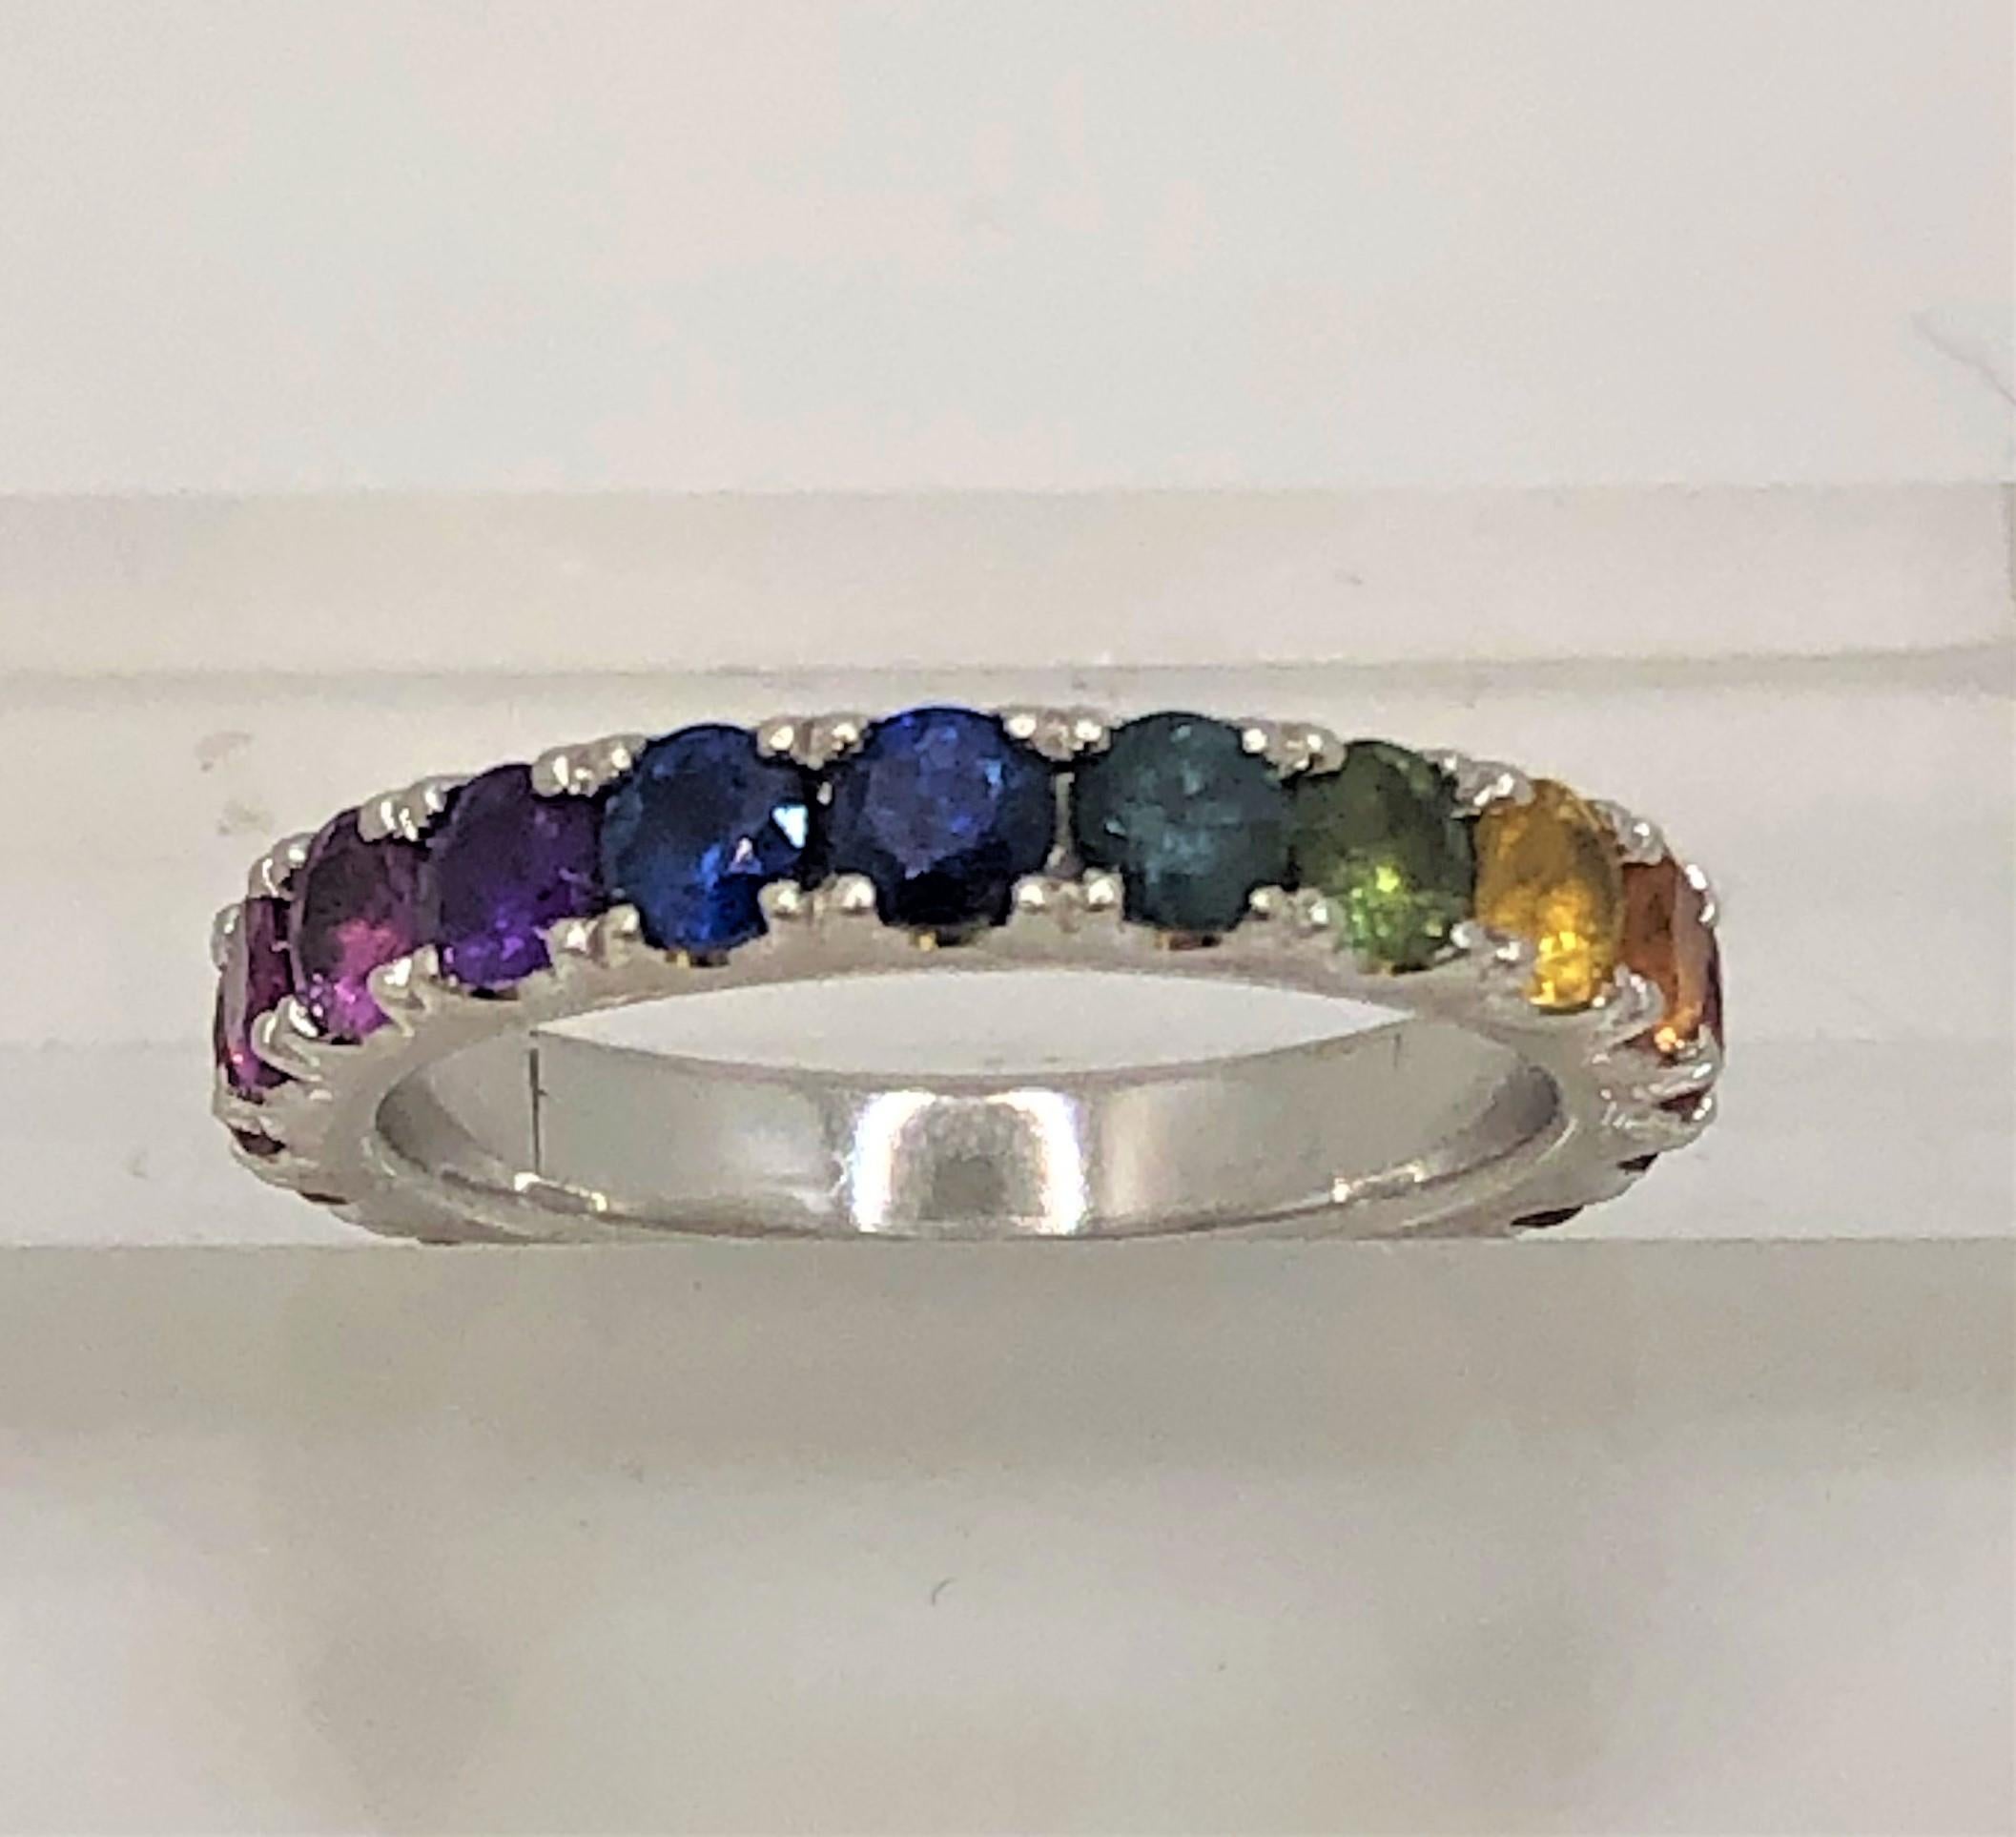 This is an everyday ring as it will match any color!  Great for stacking , too!
20 round multi-colored sapphires, prong set.
Vibrant red, orange, yellow, green, blue, purple, pink colors.
Approximately 2.25 total carat weight.
18 karat white